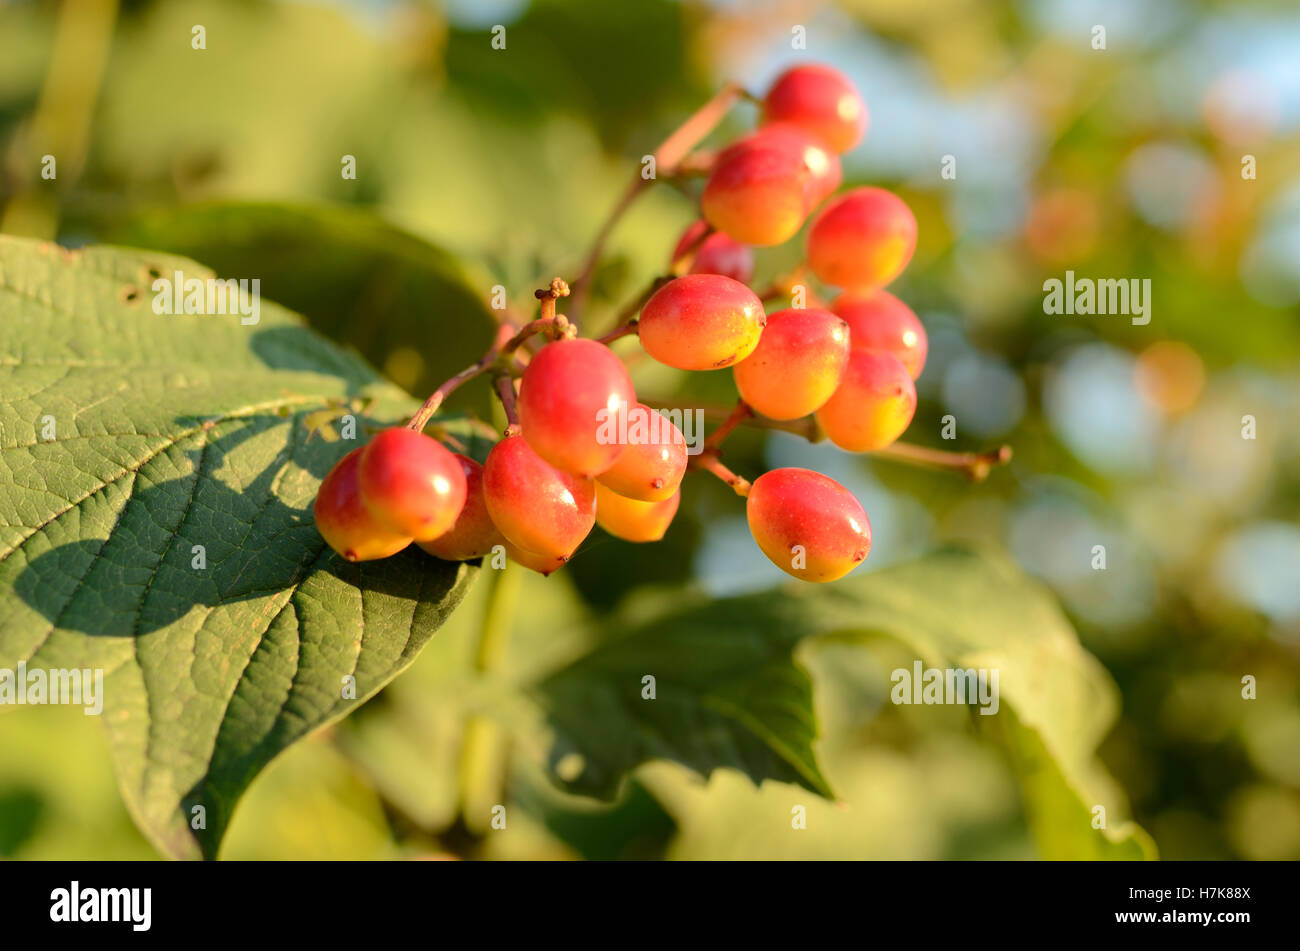 Fruits of the so-called European cranberrybush (Viburnum opulus) photographed at low f-number to highlight the front and blur the background. Stock Photo